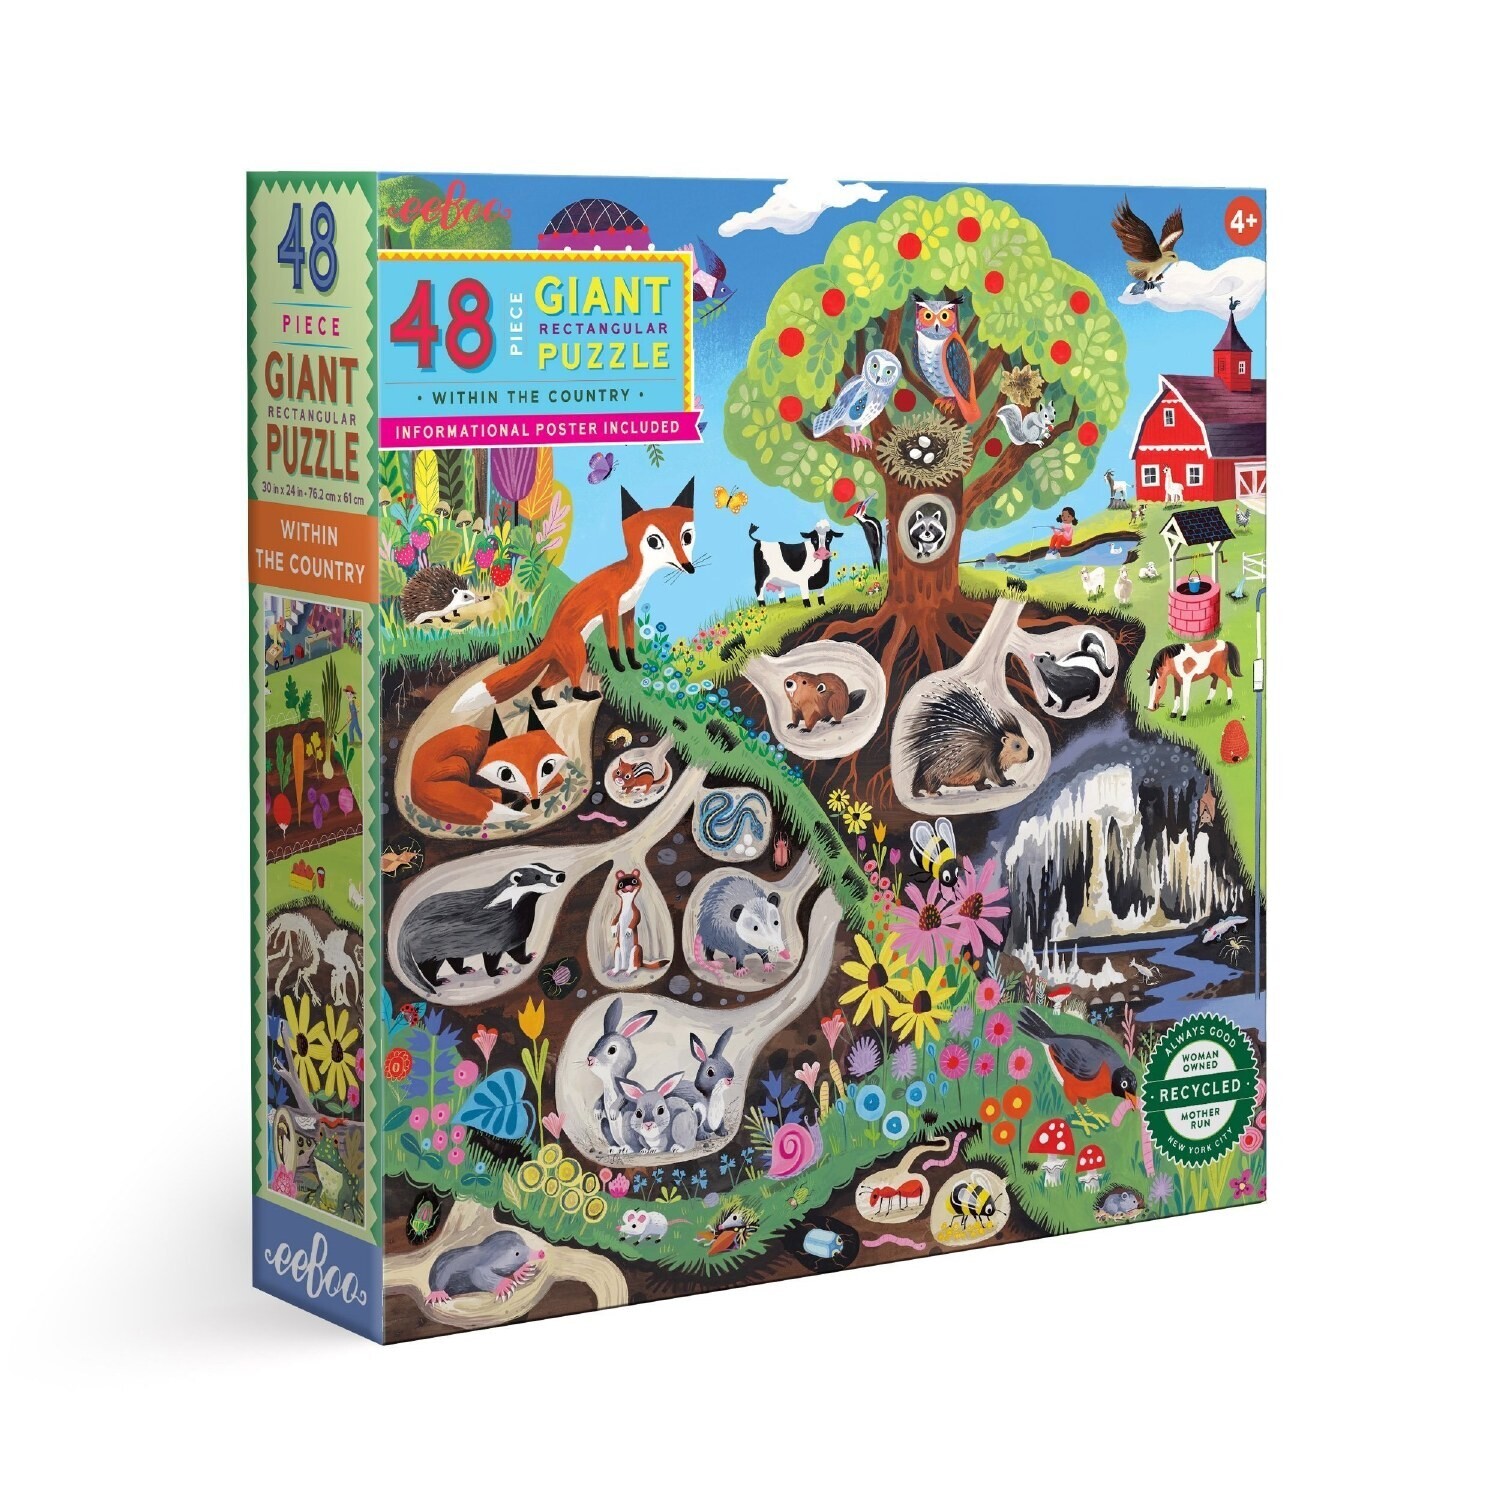 Within the Country 48pc Puzzle